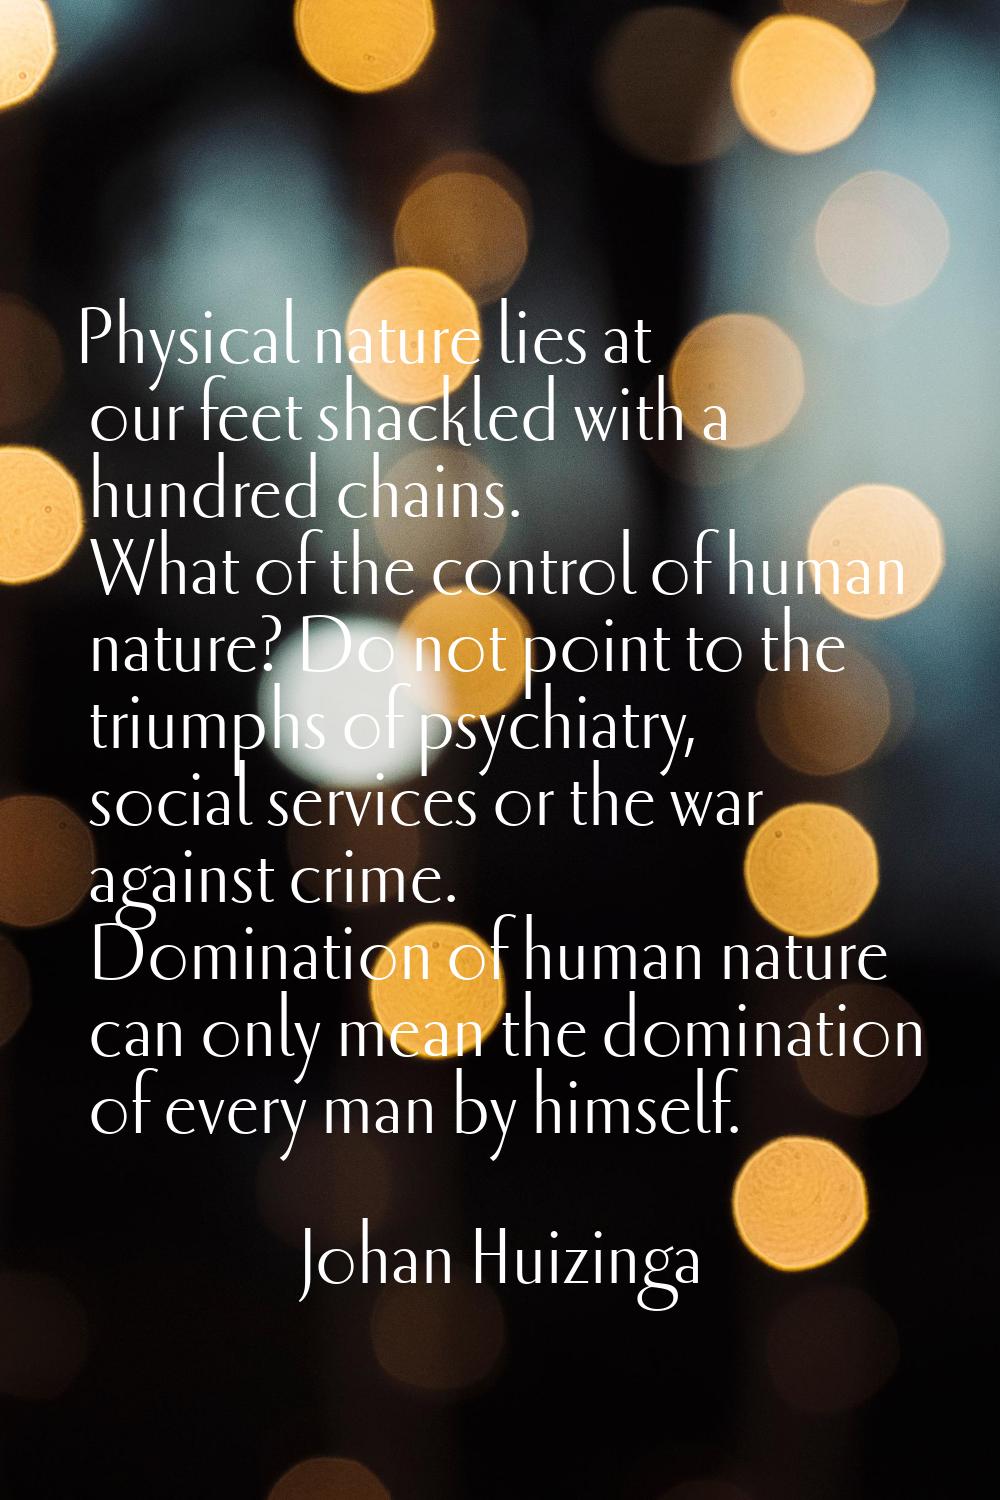 Physical nature lies at our feet shackled with a hundred chains. What of the control of human natur